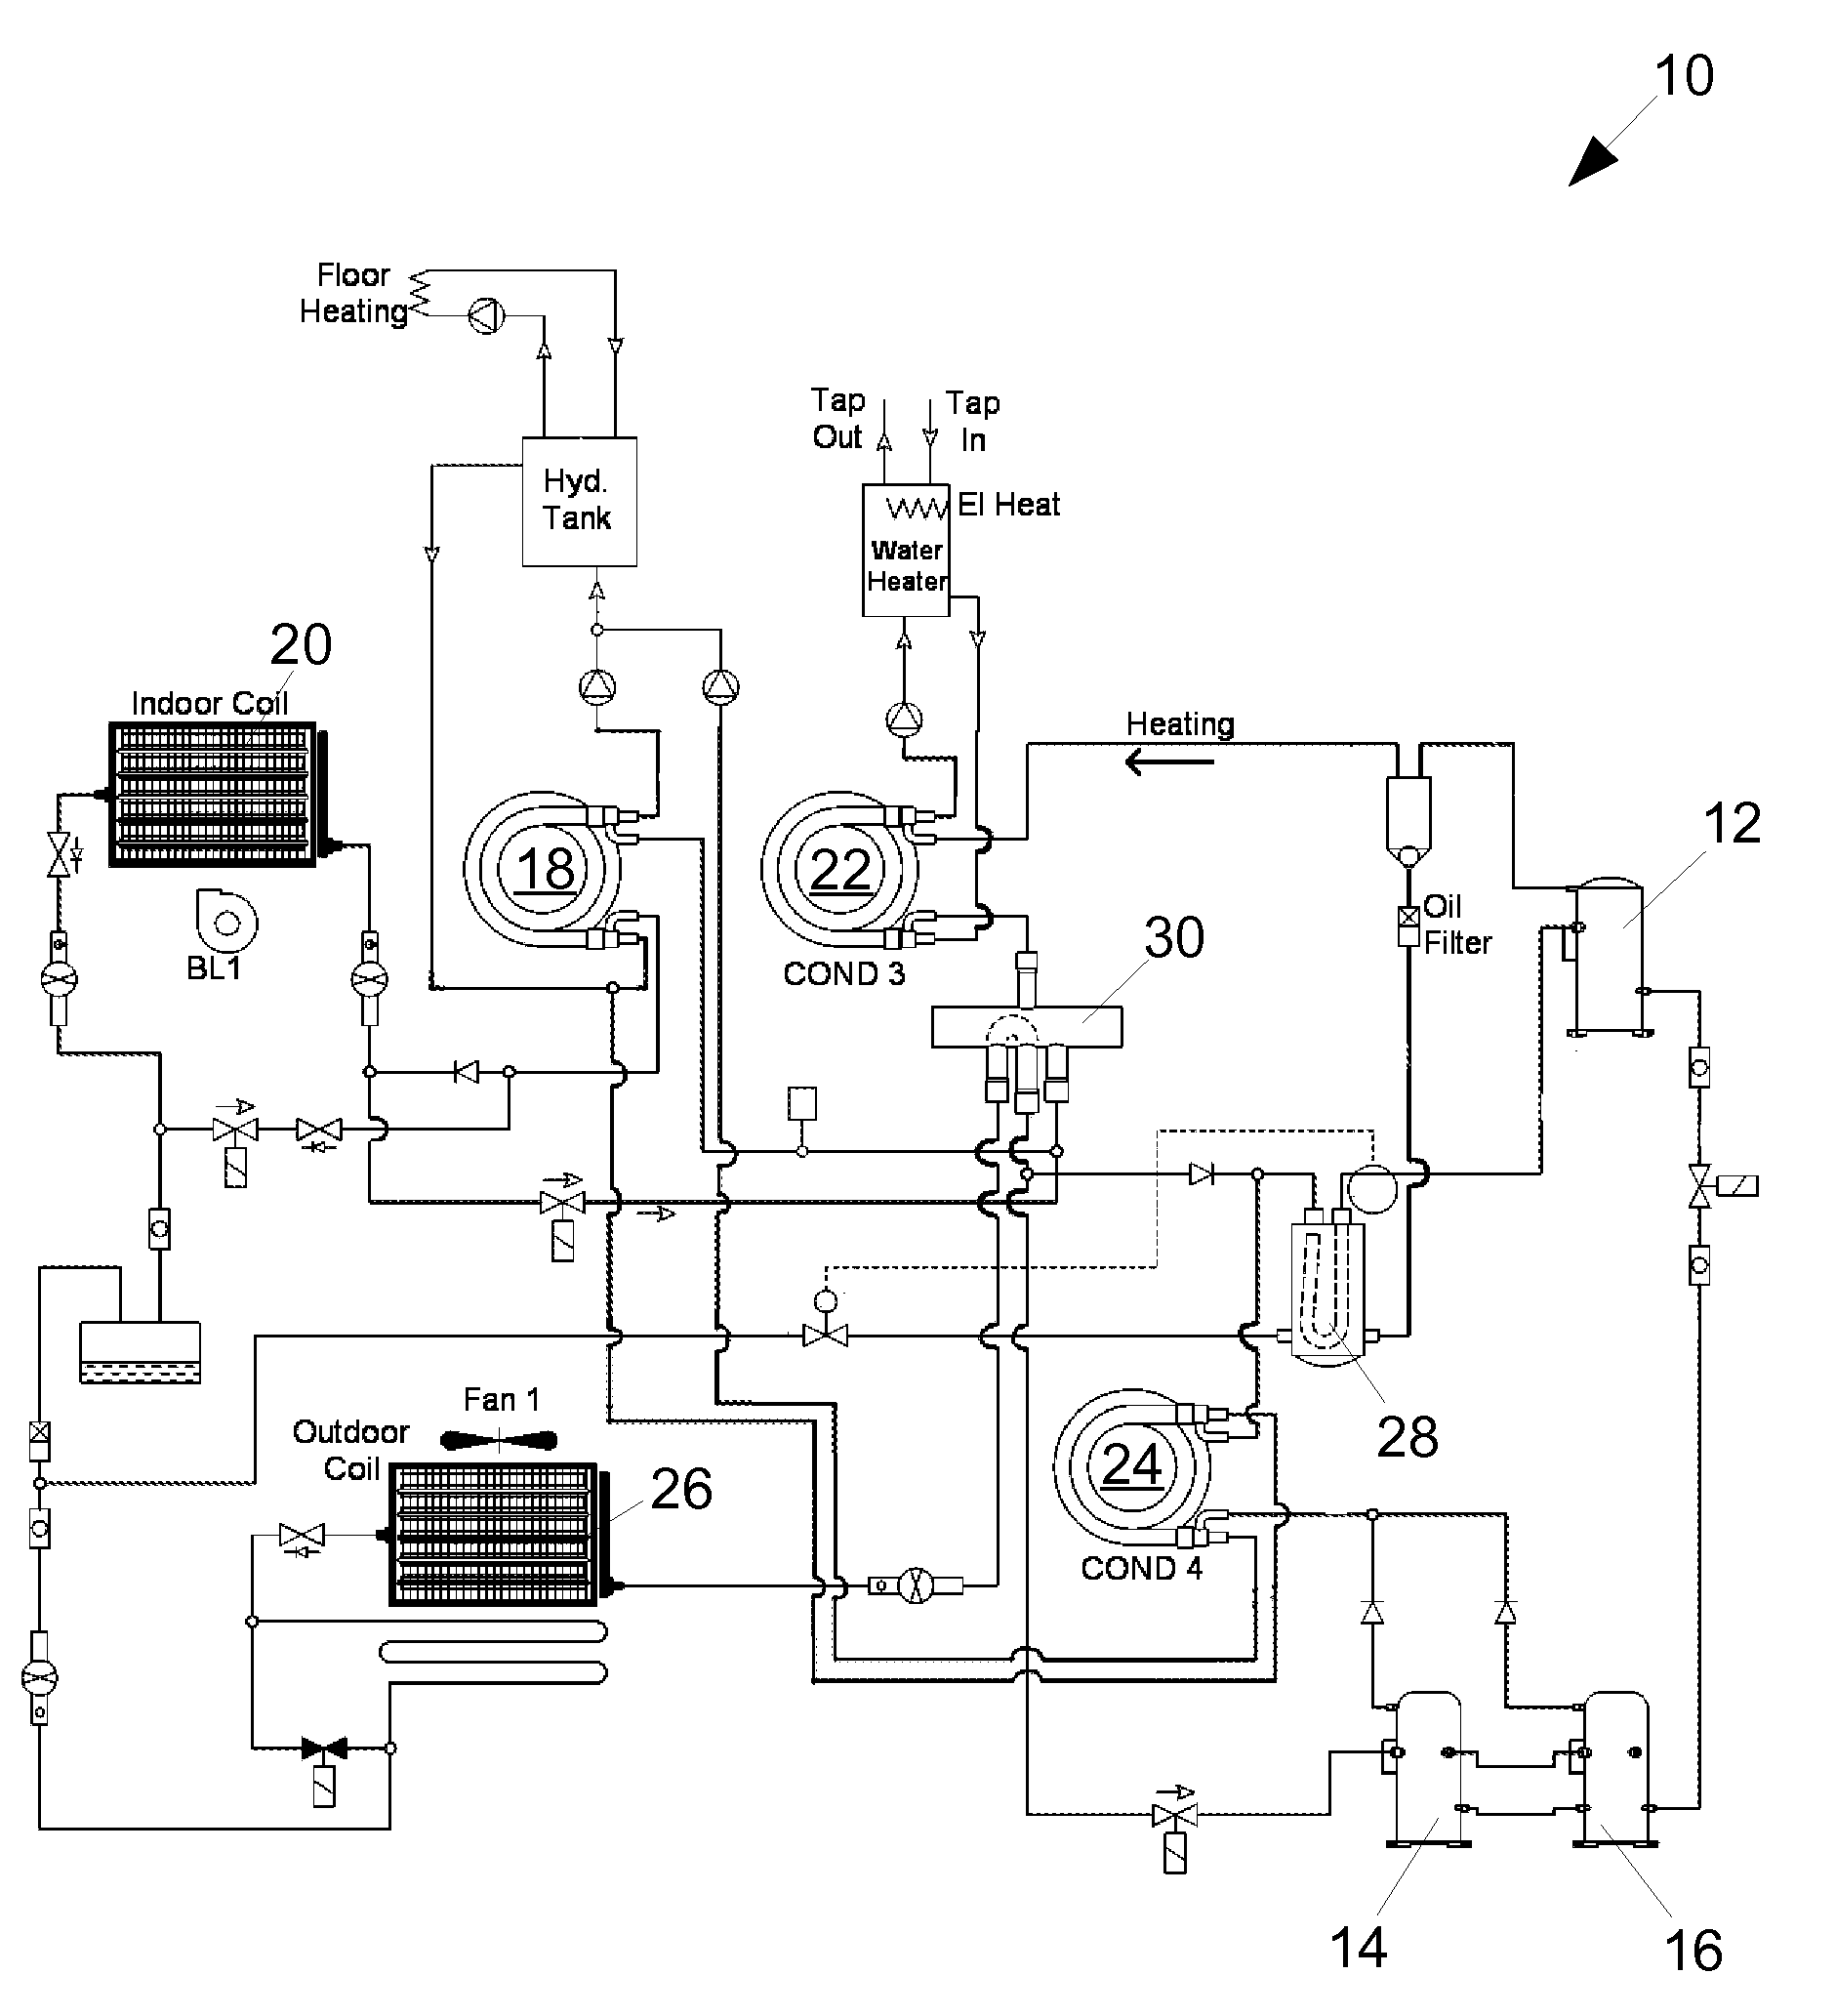 Heat pump with forced air heating regulated by withdrawal of heat to a radiant heating system